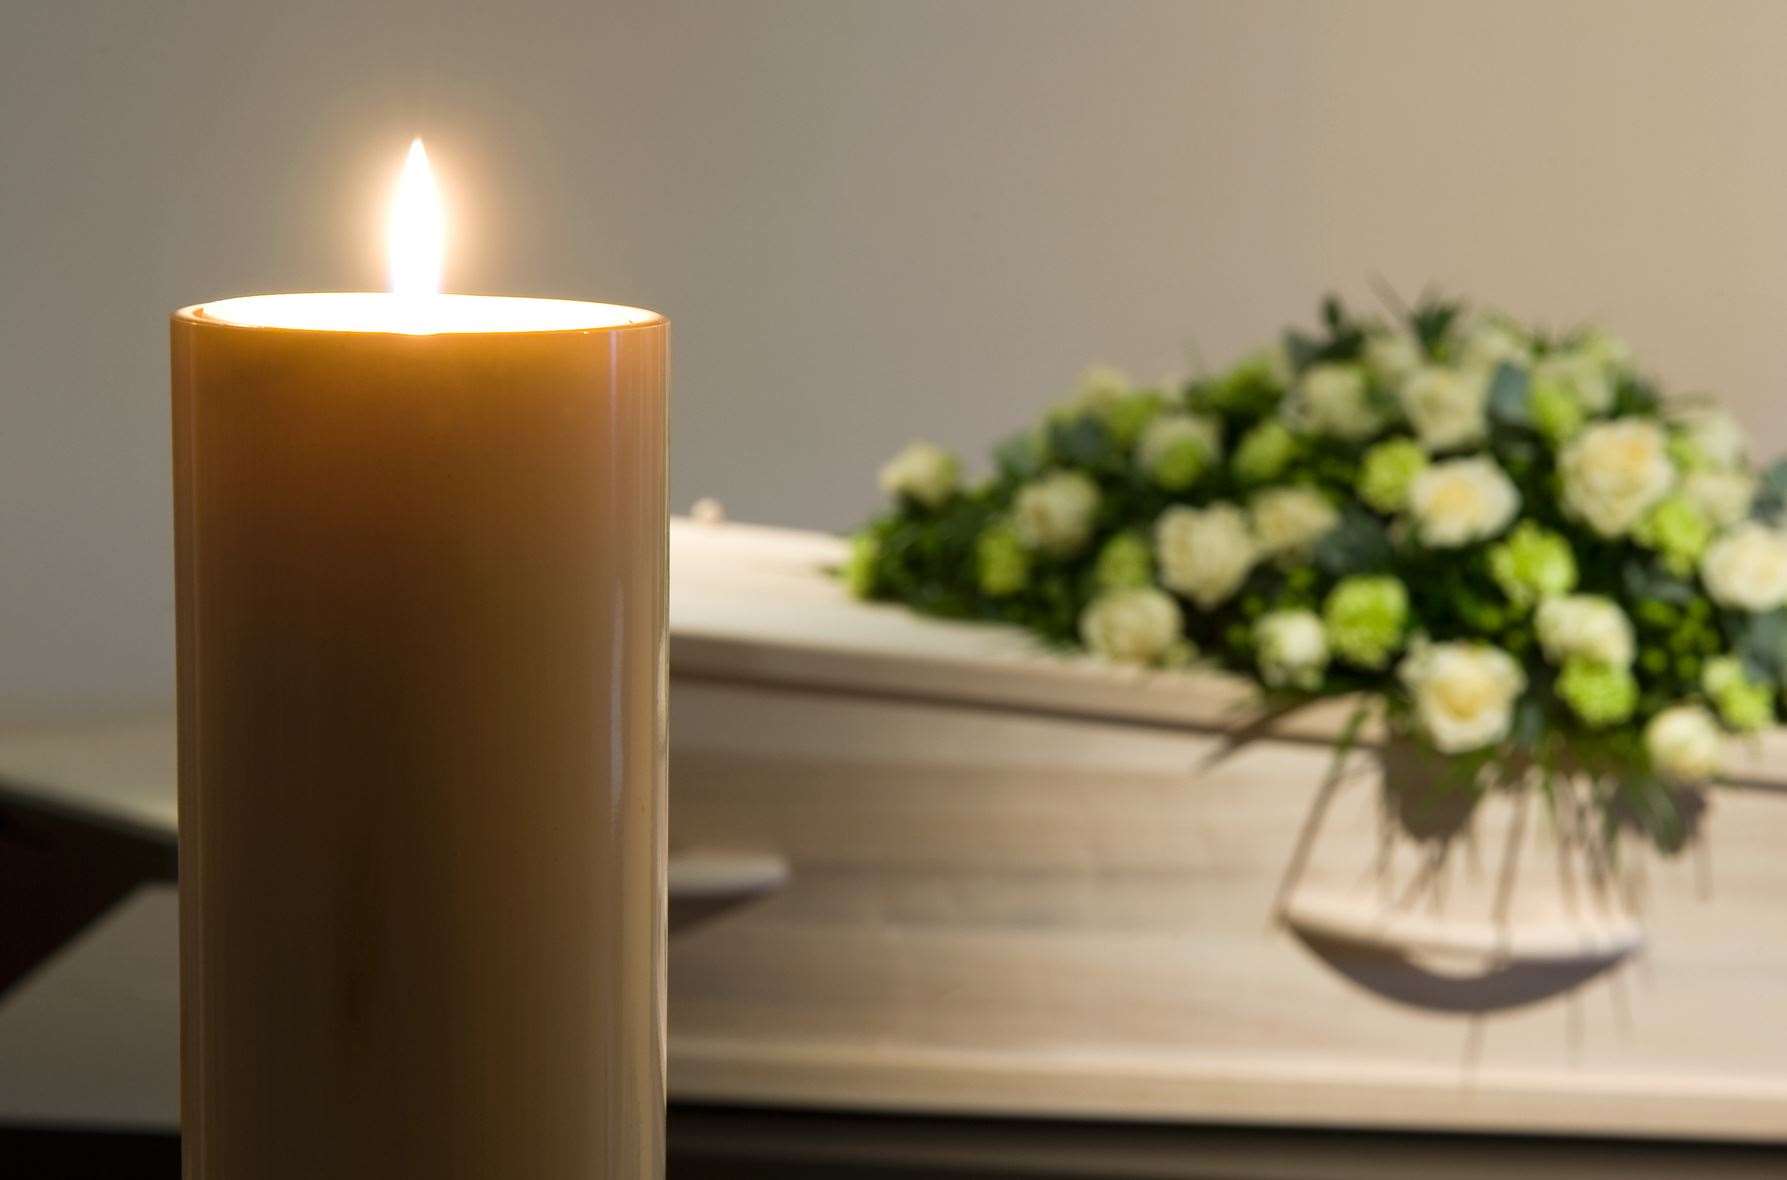 Funeral services in great demand across Medway